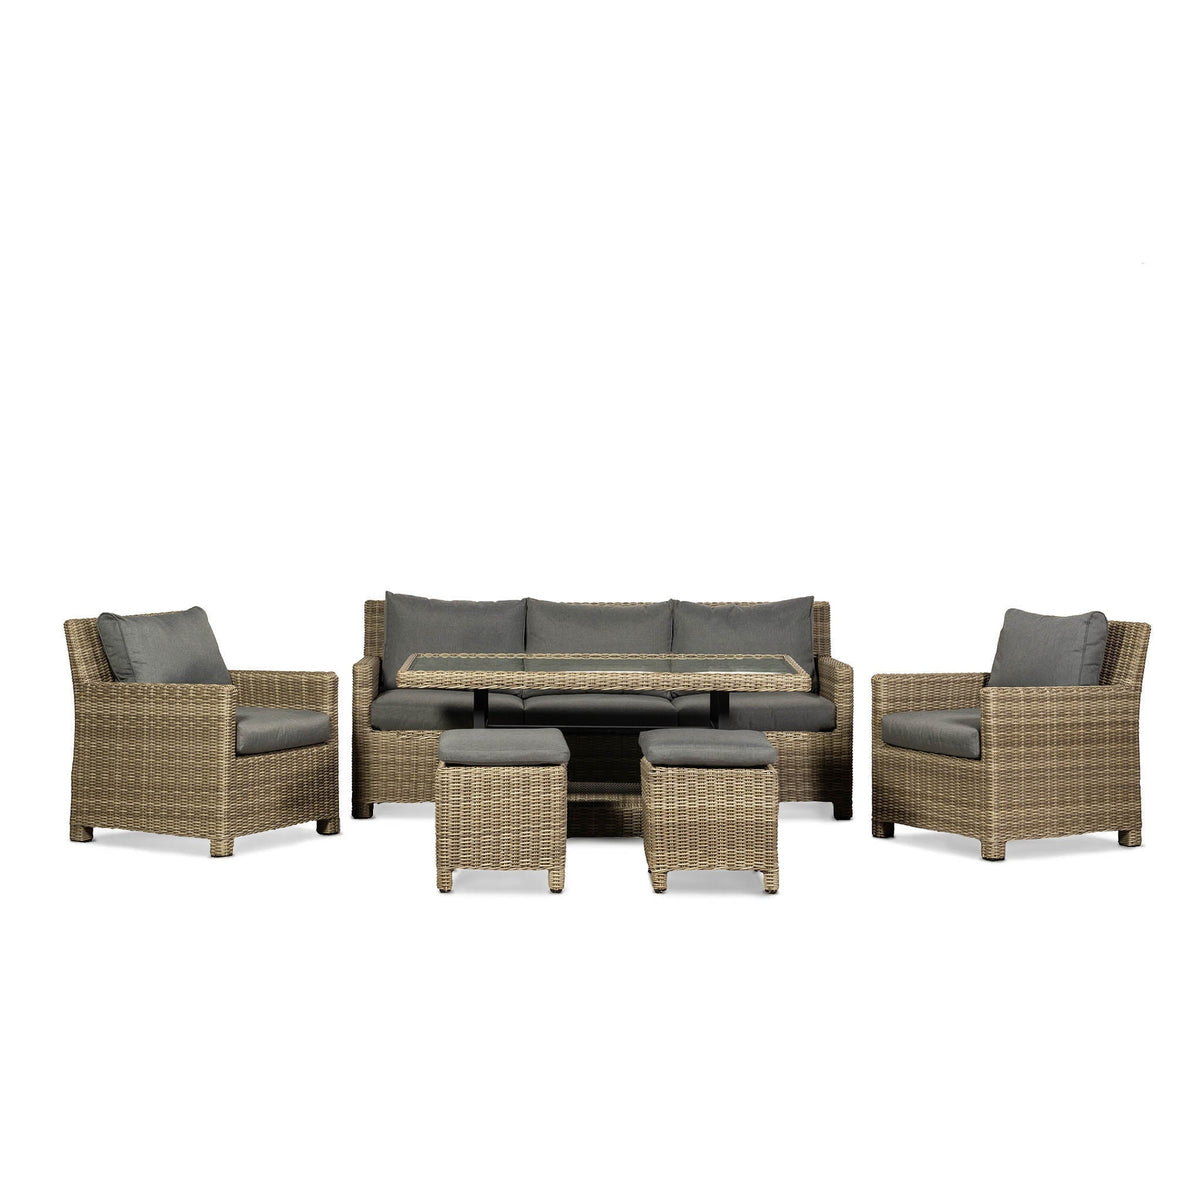 Wentworth Deluxe Rattan Sofa Garden Lounge Set with Adjustable Table - Table up